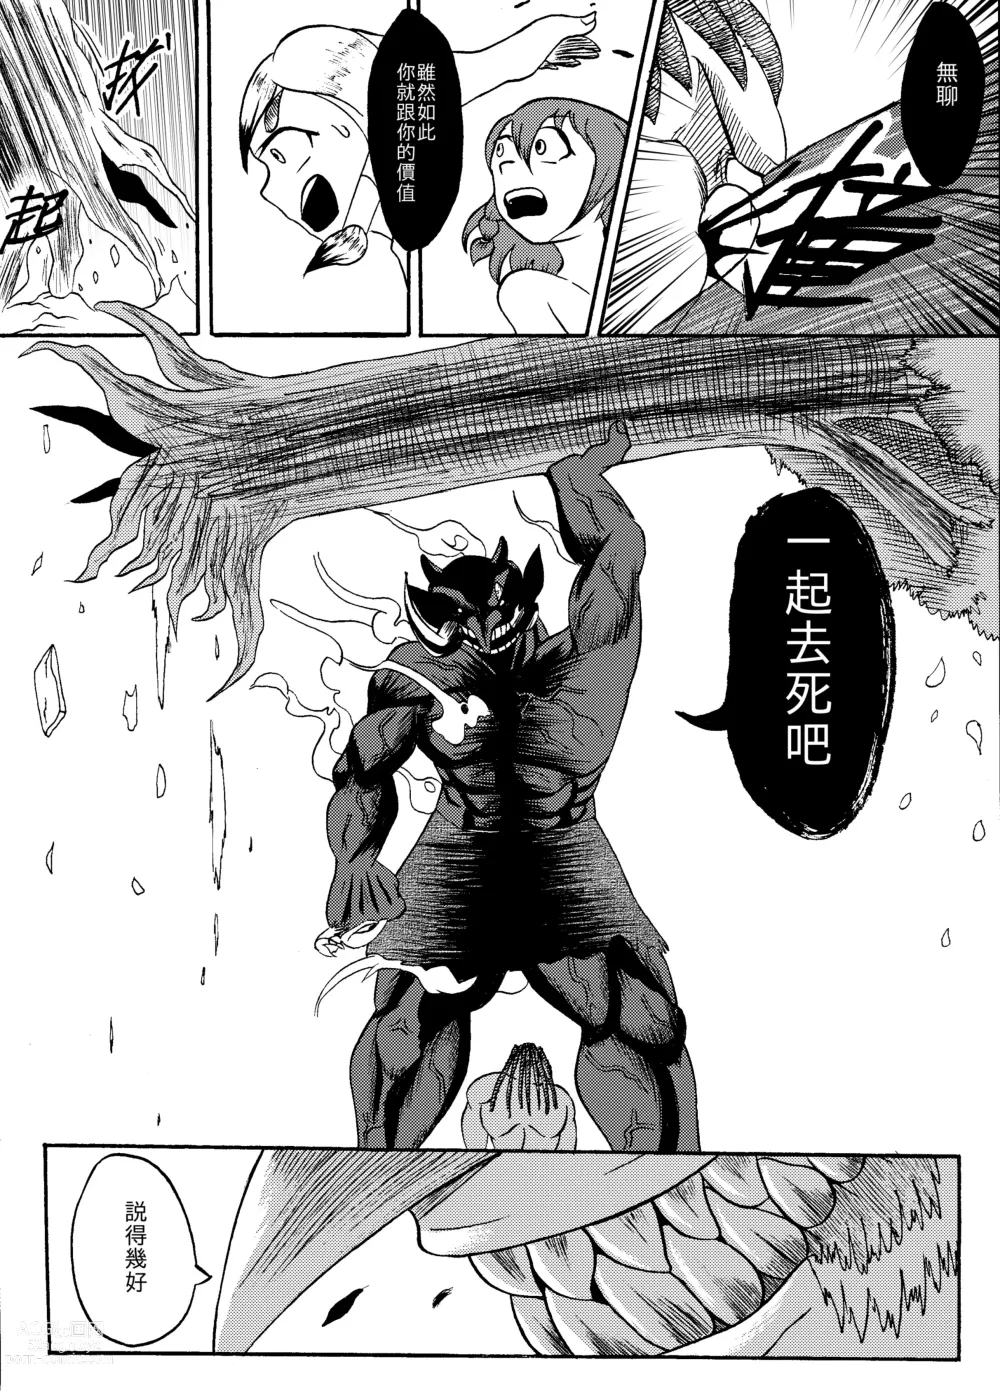 Page 27 of manga 哥布林傳奇8 Goblin Legend Chapter